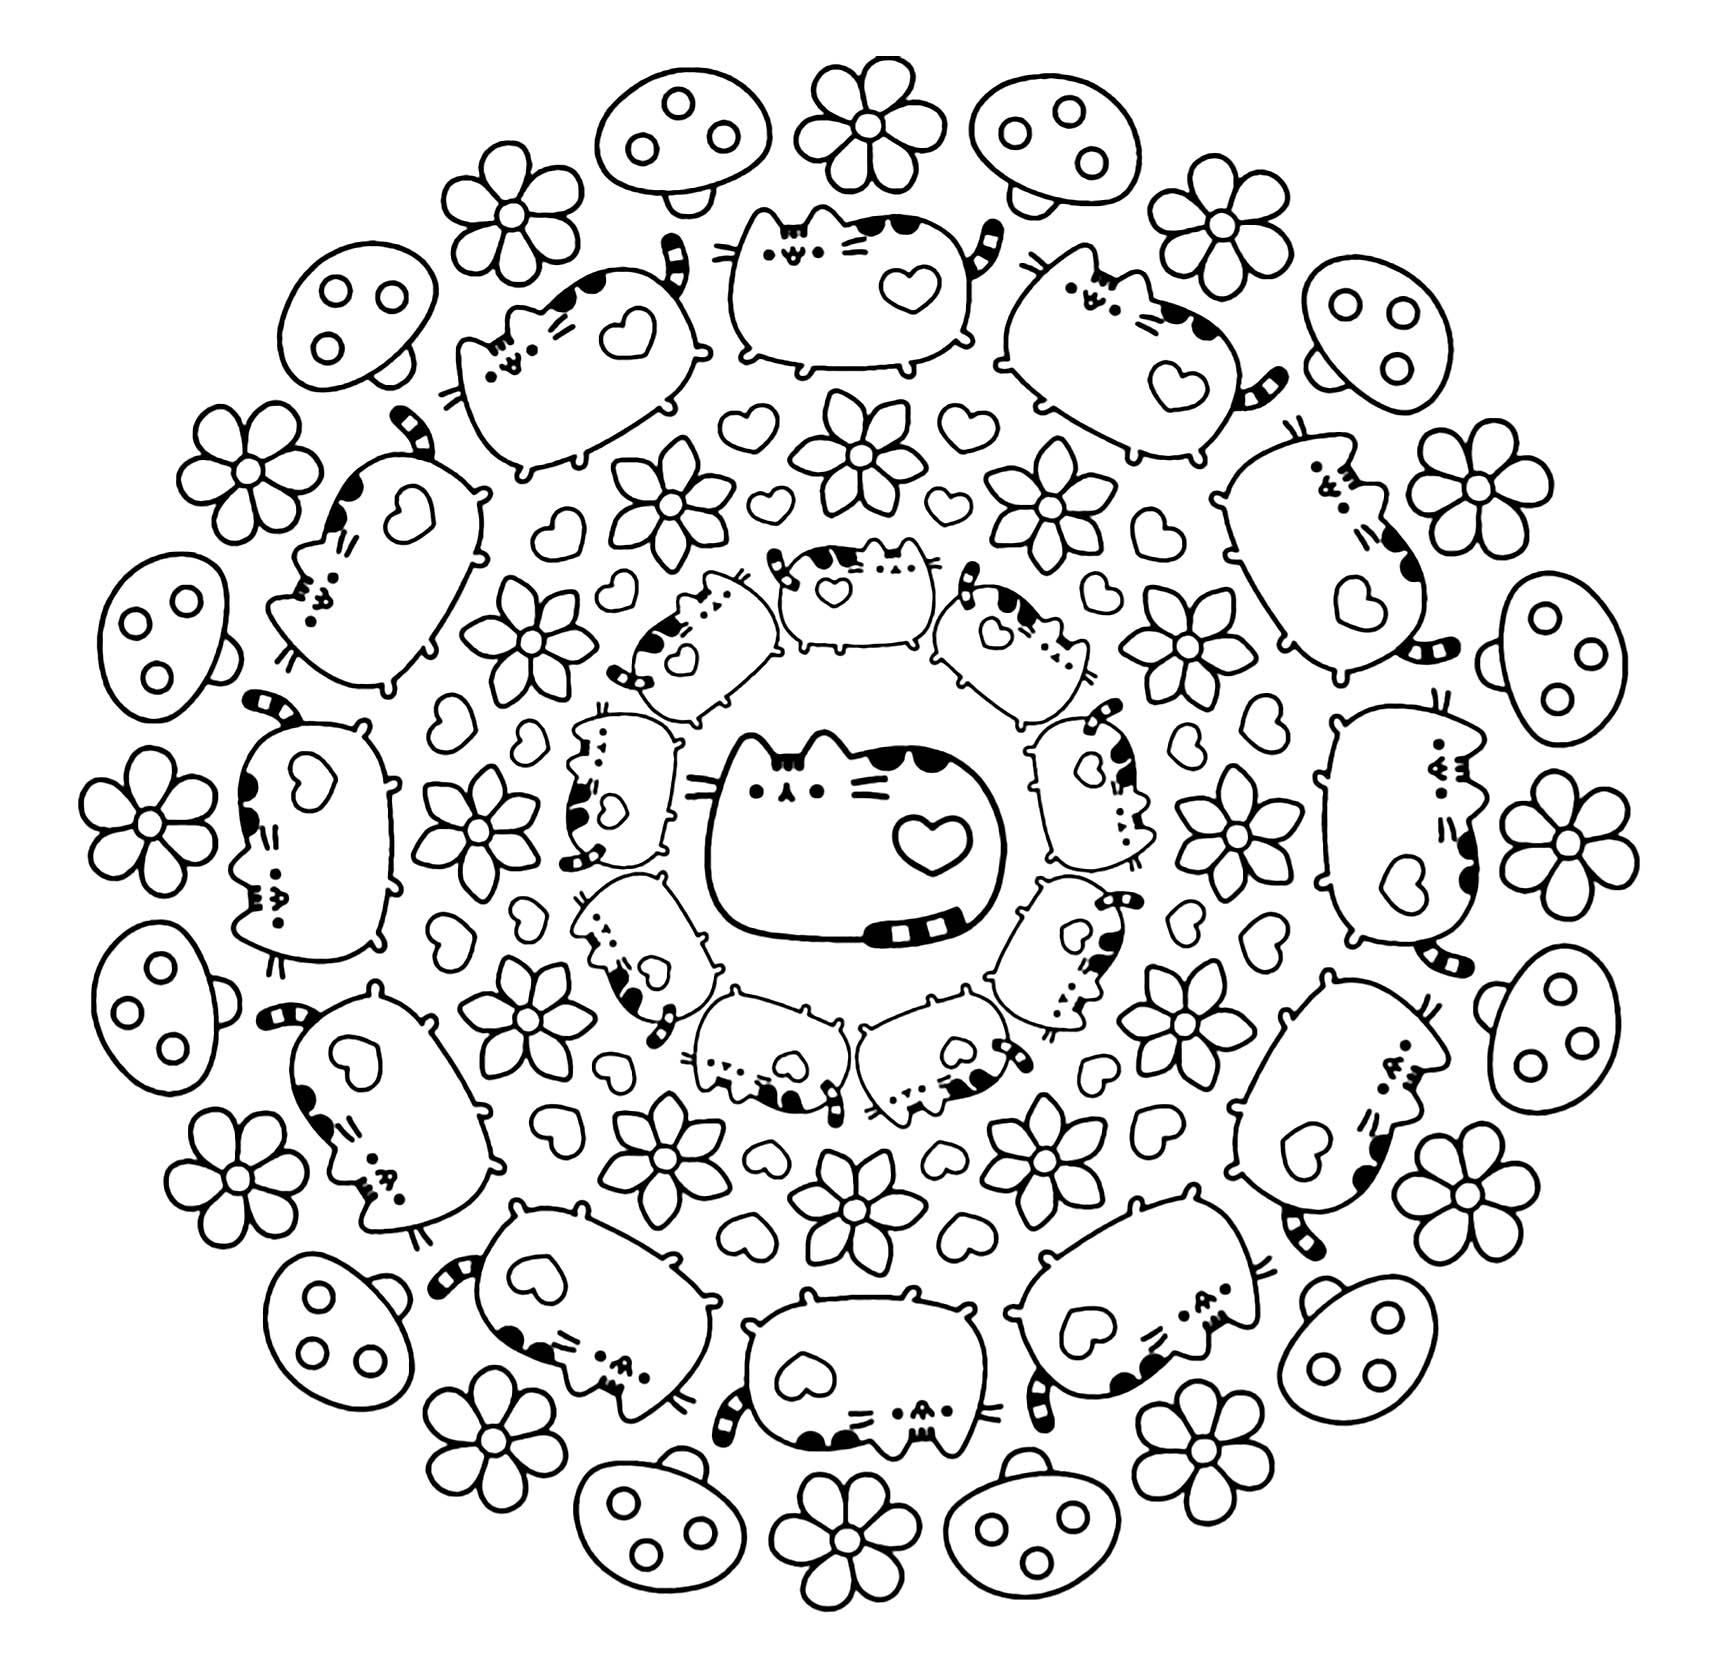 A Mandala of 'standard' difficulty level, which will be suitable for kids and adults who just want to color. Still your mind : this step is essential to get the most out of coloring to reduce your anxiety.